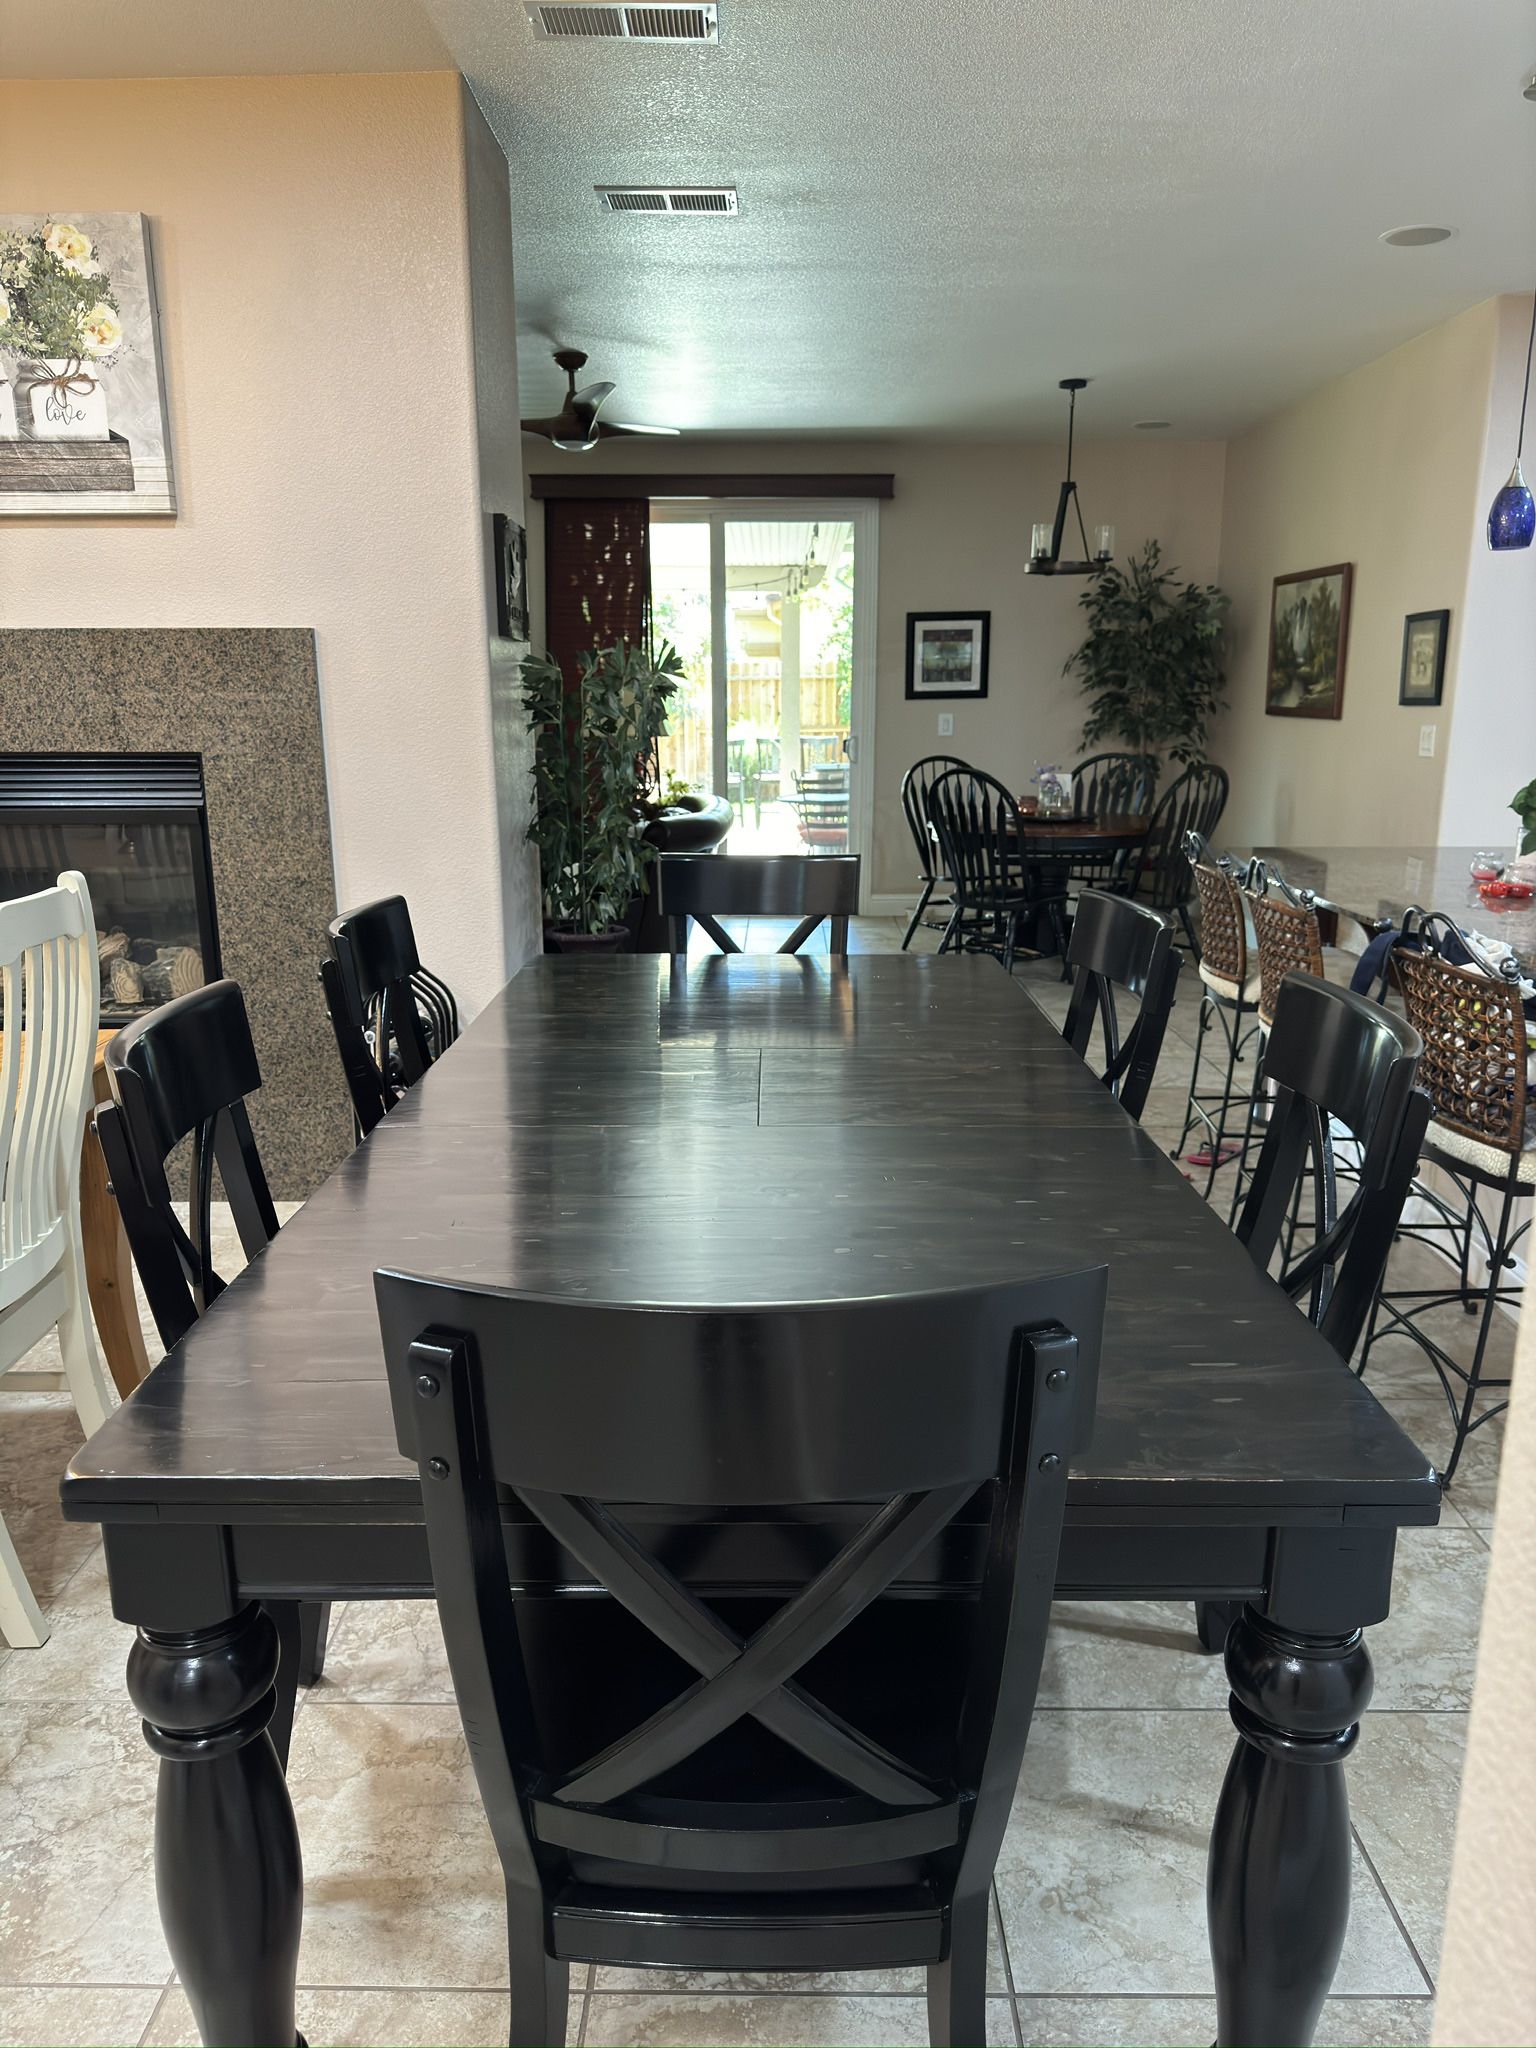 Solid Wood Dining Table w/ Leaf  & 6 Chairs